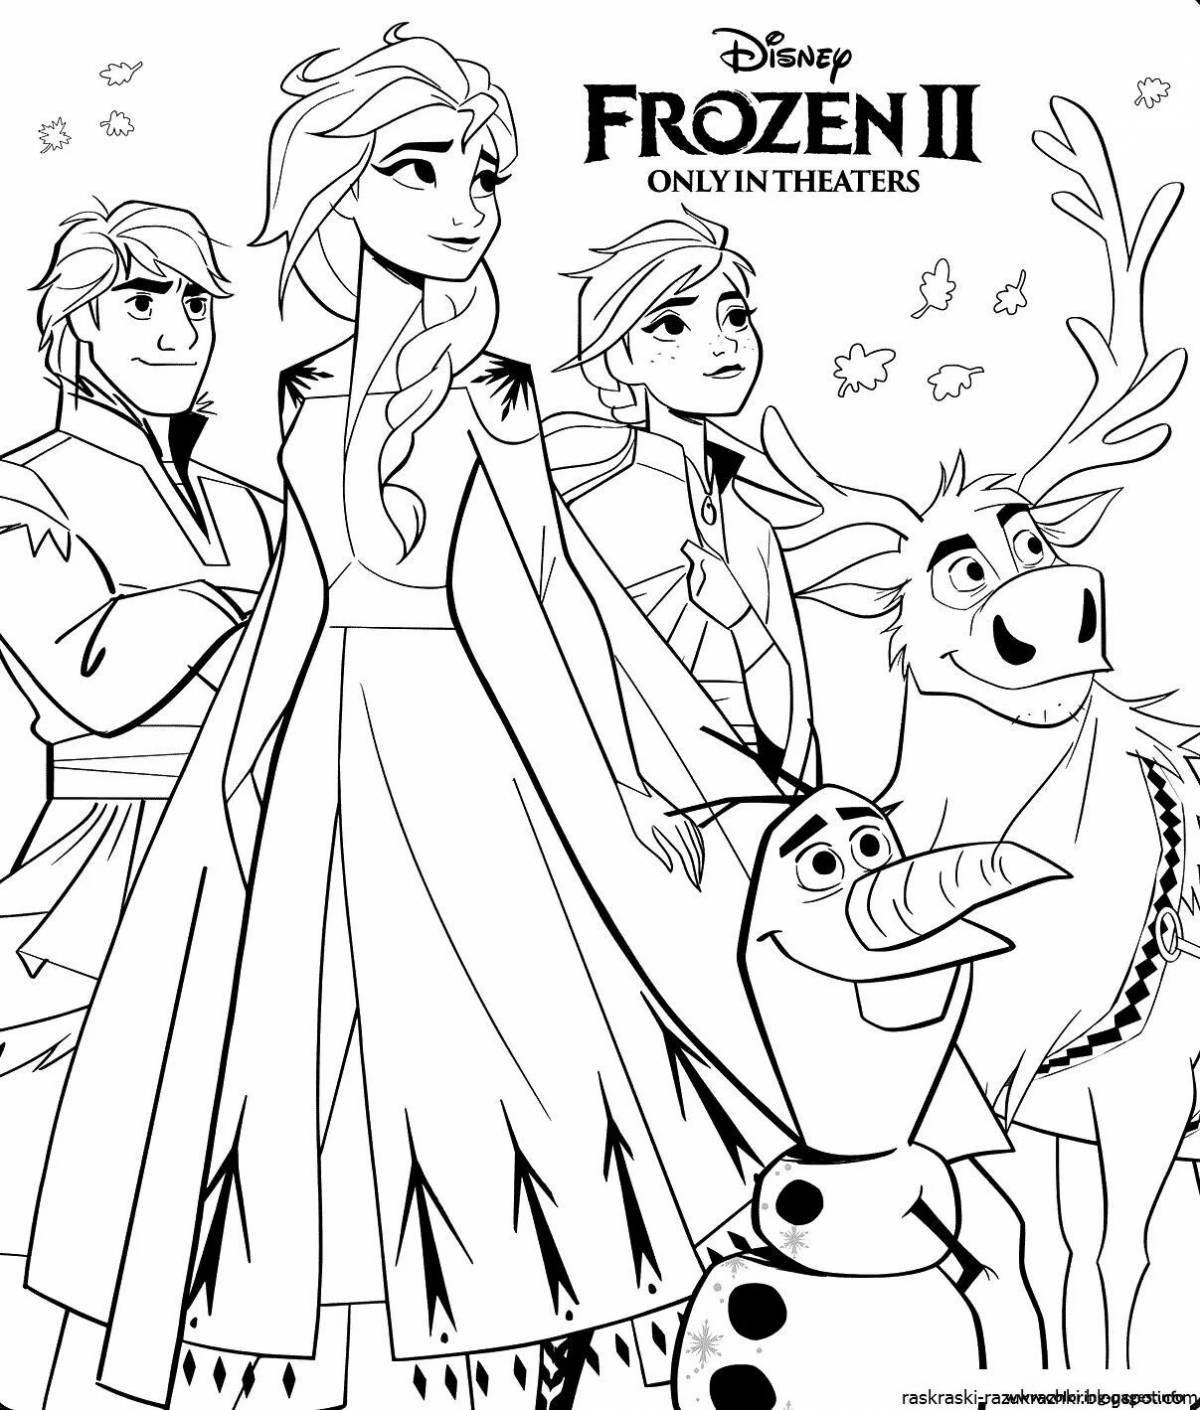 Majestic mega cold heart 2 coloring page